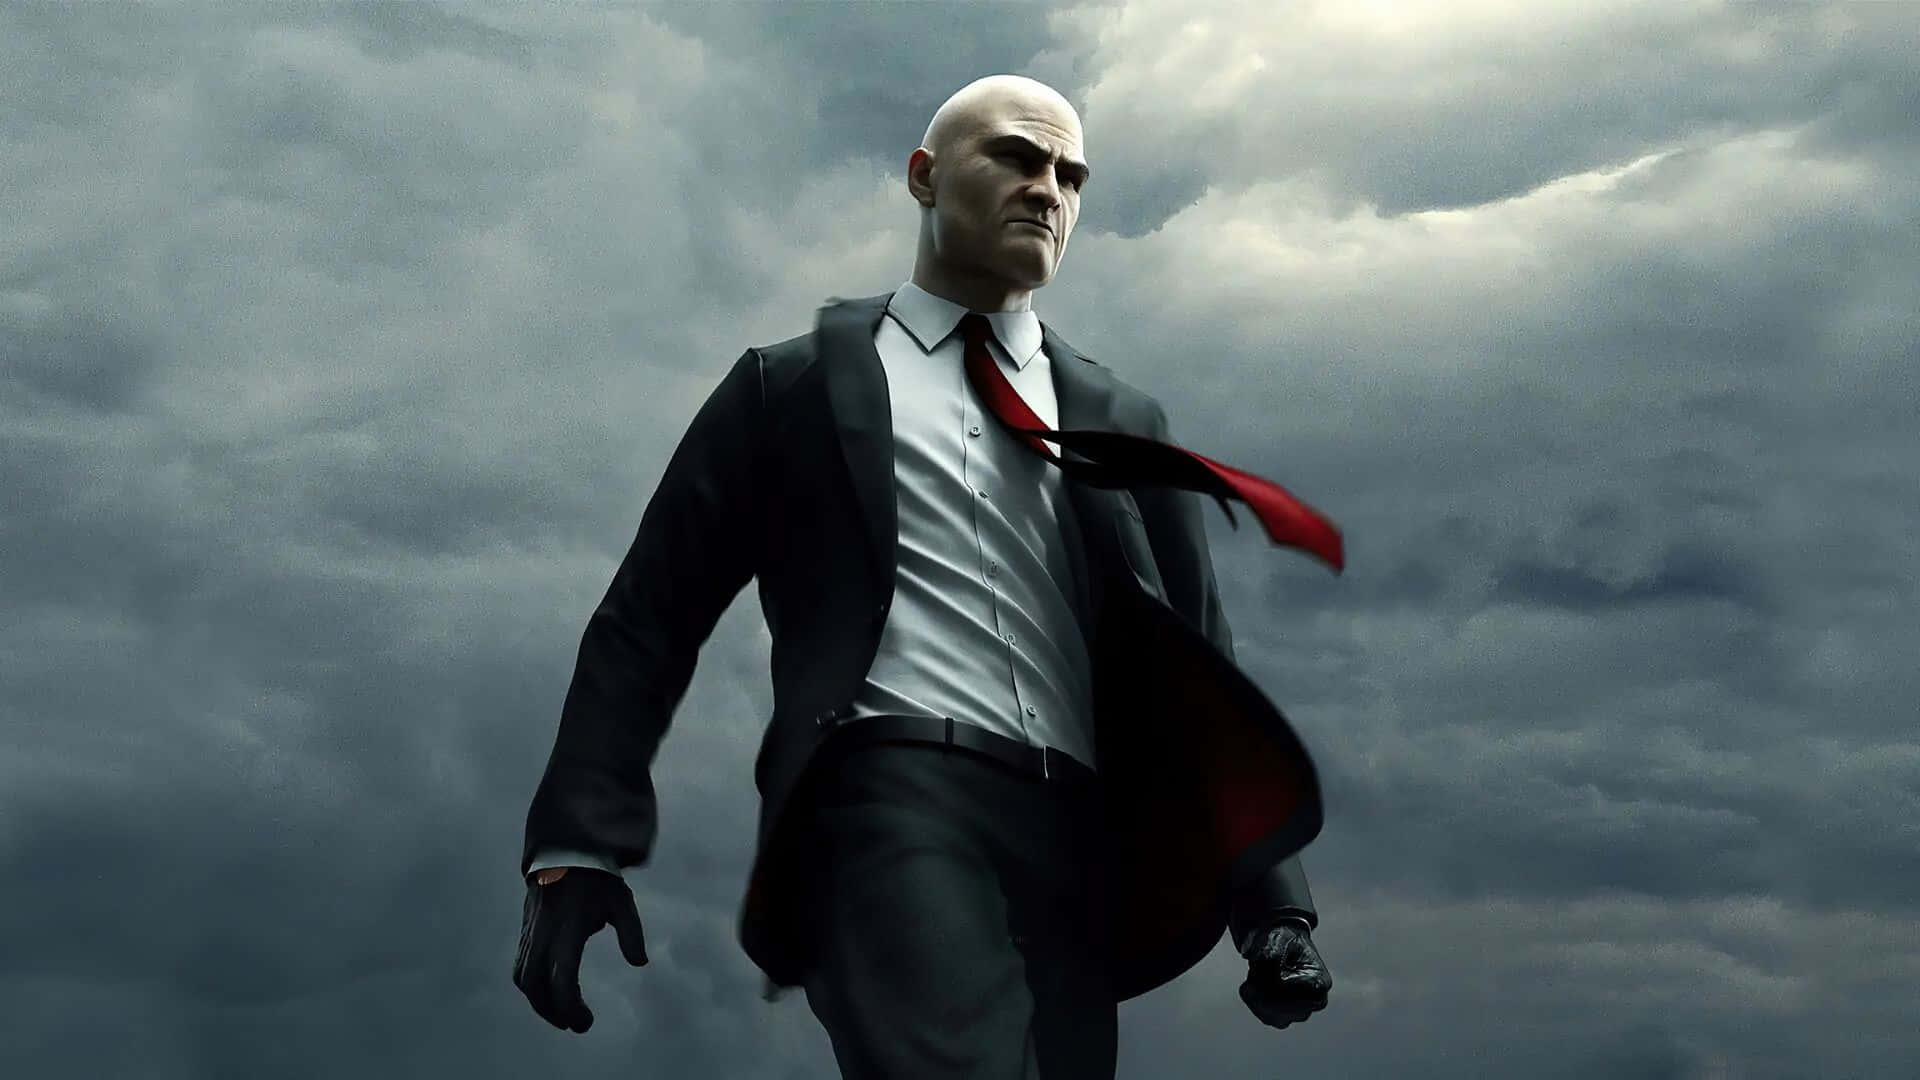 Hitman Absolution, Become the Ultimate Assassin